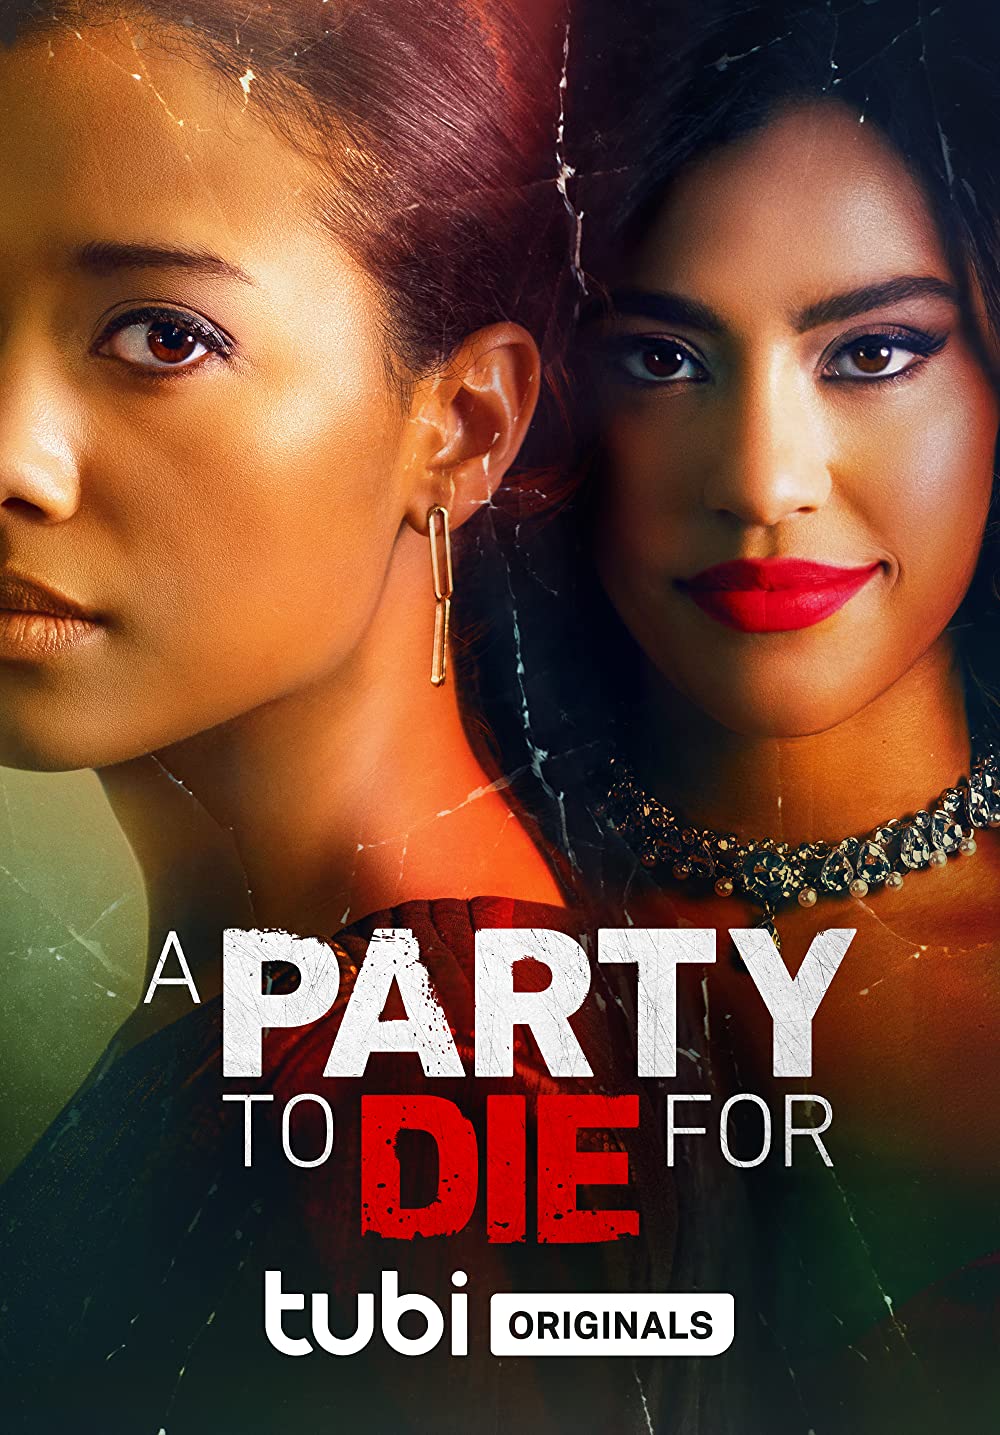 A Party To Die For 2022 English Movie 720p HDRip ESub 800MB Download